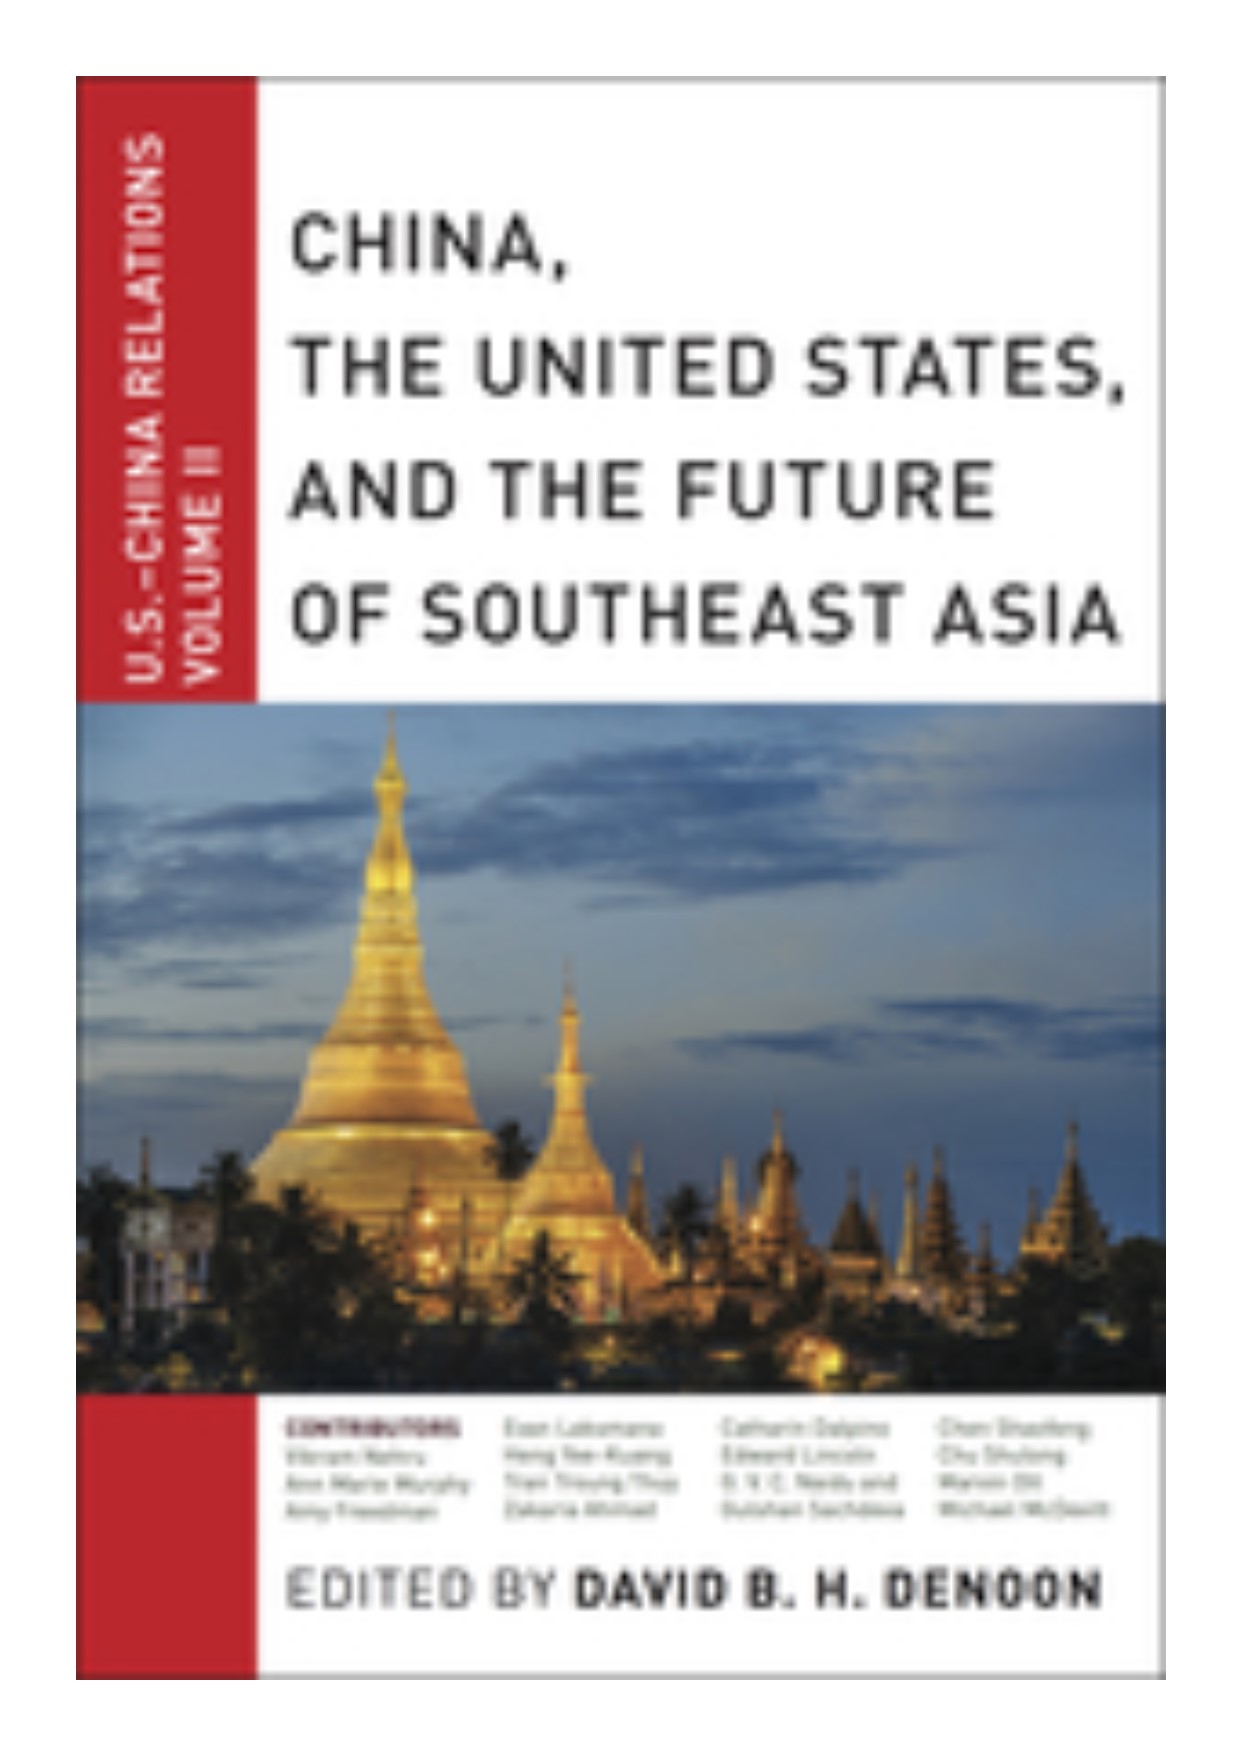 China, the United States, and the future of Southeast Asia U.S.- China relations volume II